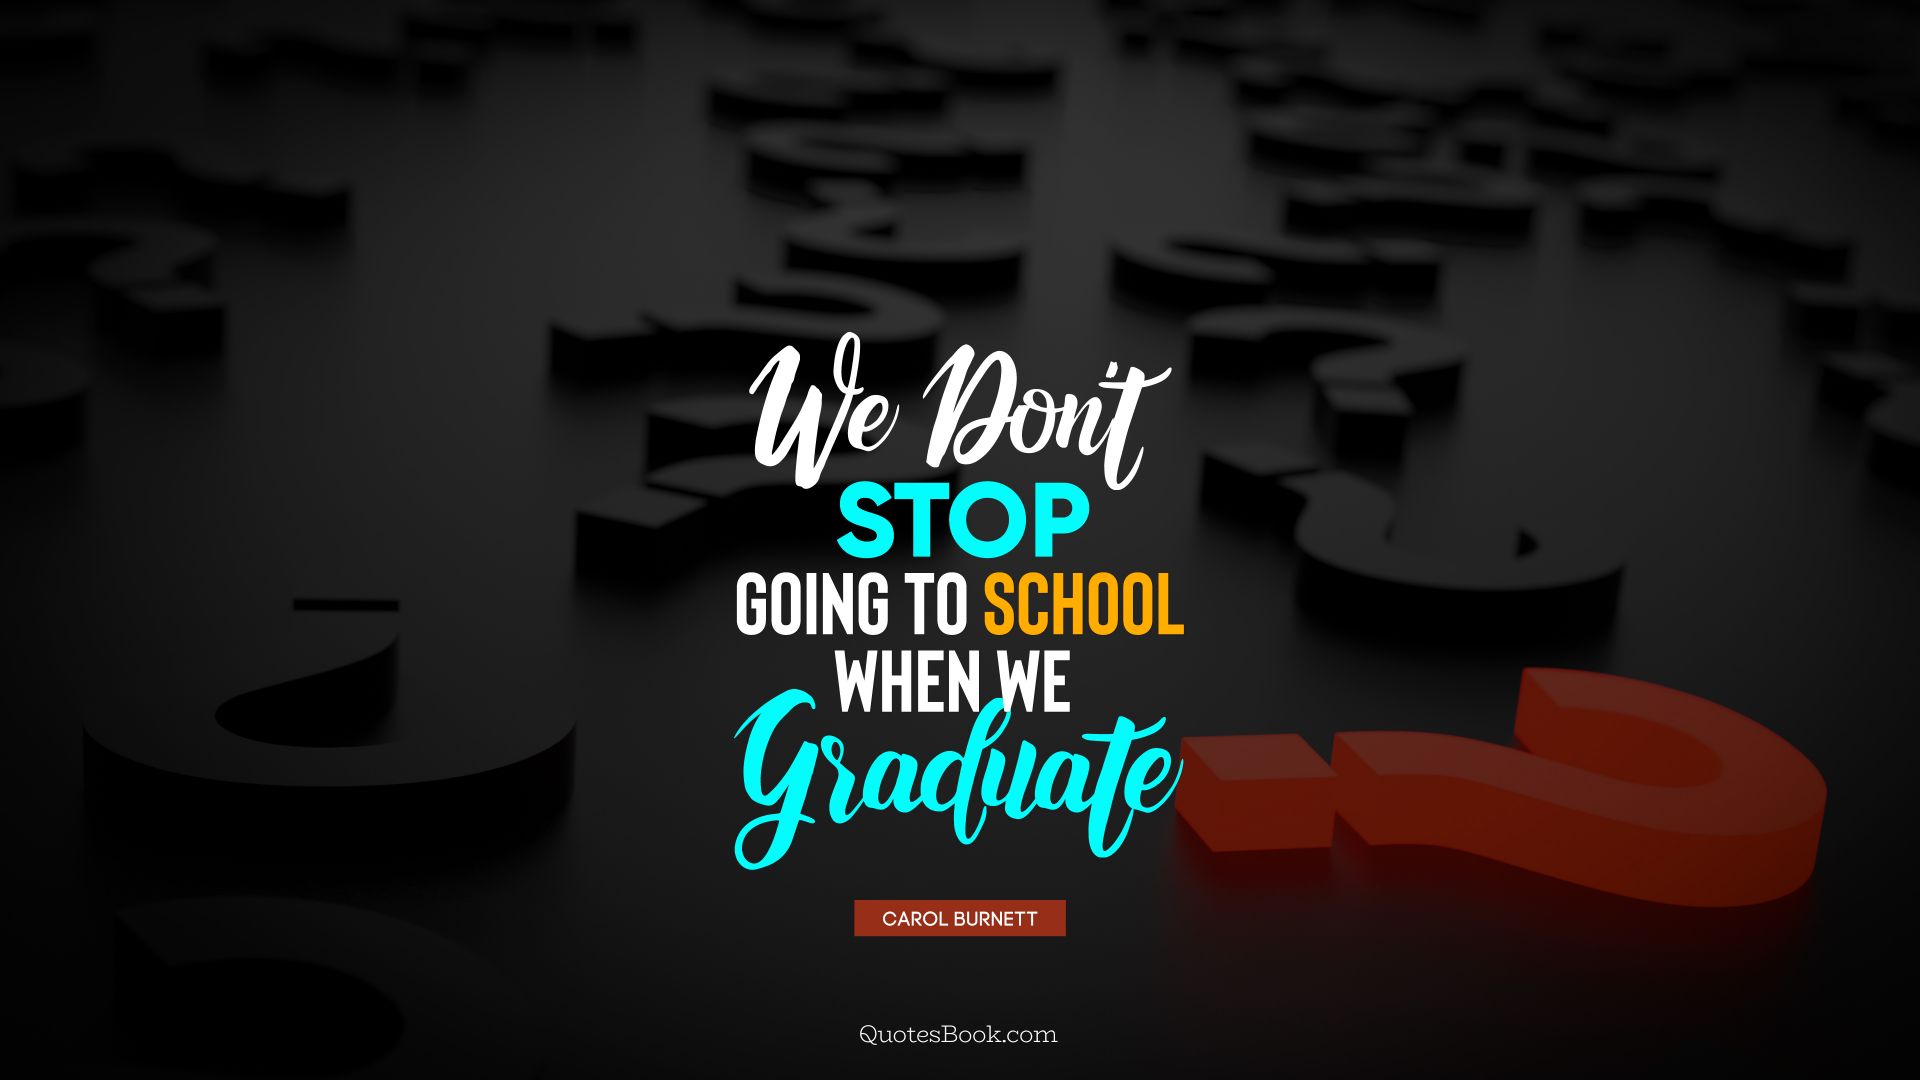 We don't stop going to school when we graduate. - Quote by Carol Burnett